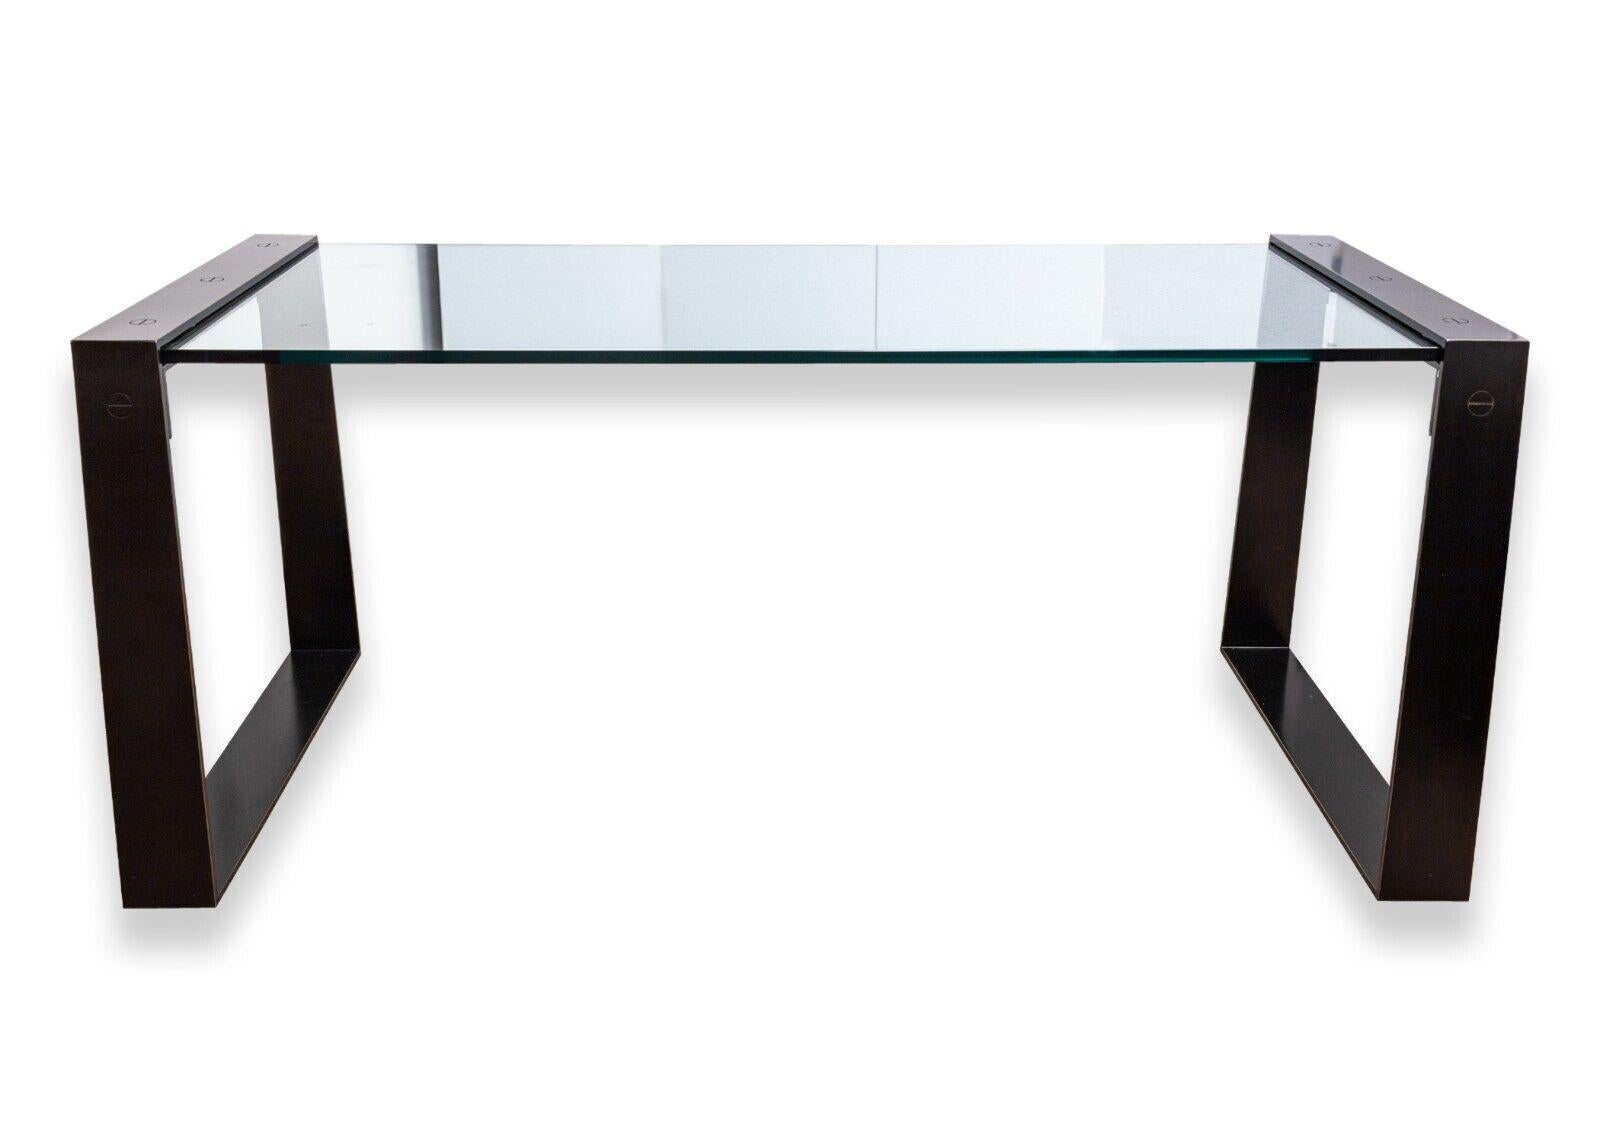 A modern contemporary Restoration Hardware glass desk. This magnificent desk from restoration hardware features a very modern design featuring a thick glass top that is supported by two black rounded rectangular legs on either side. The glass slips